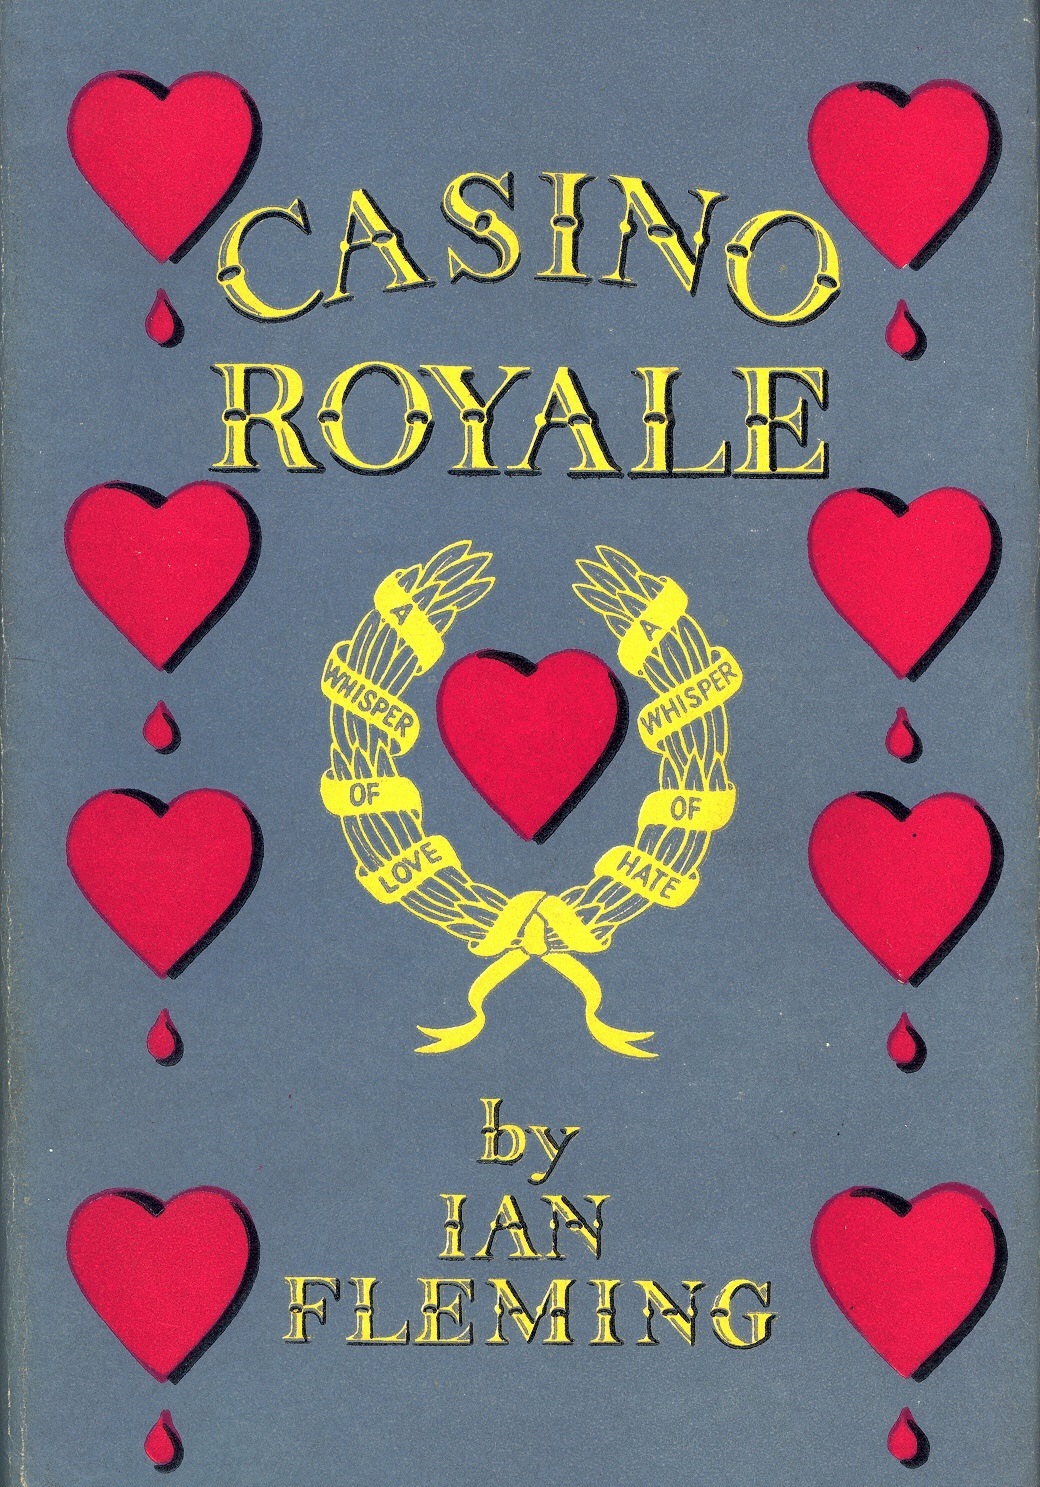 casino royale characters cast